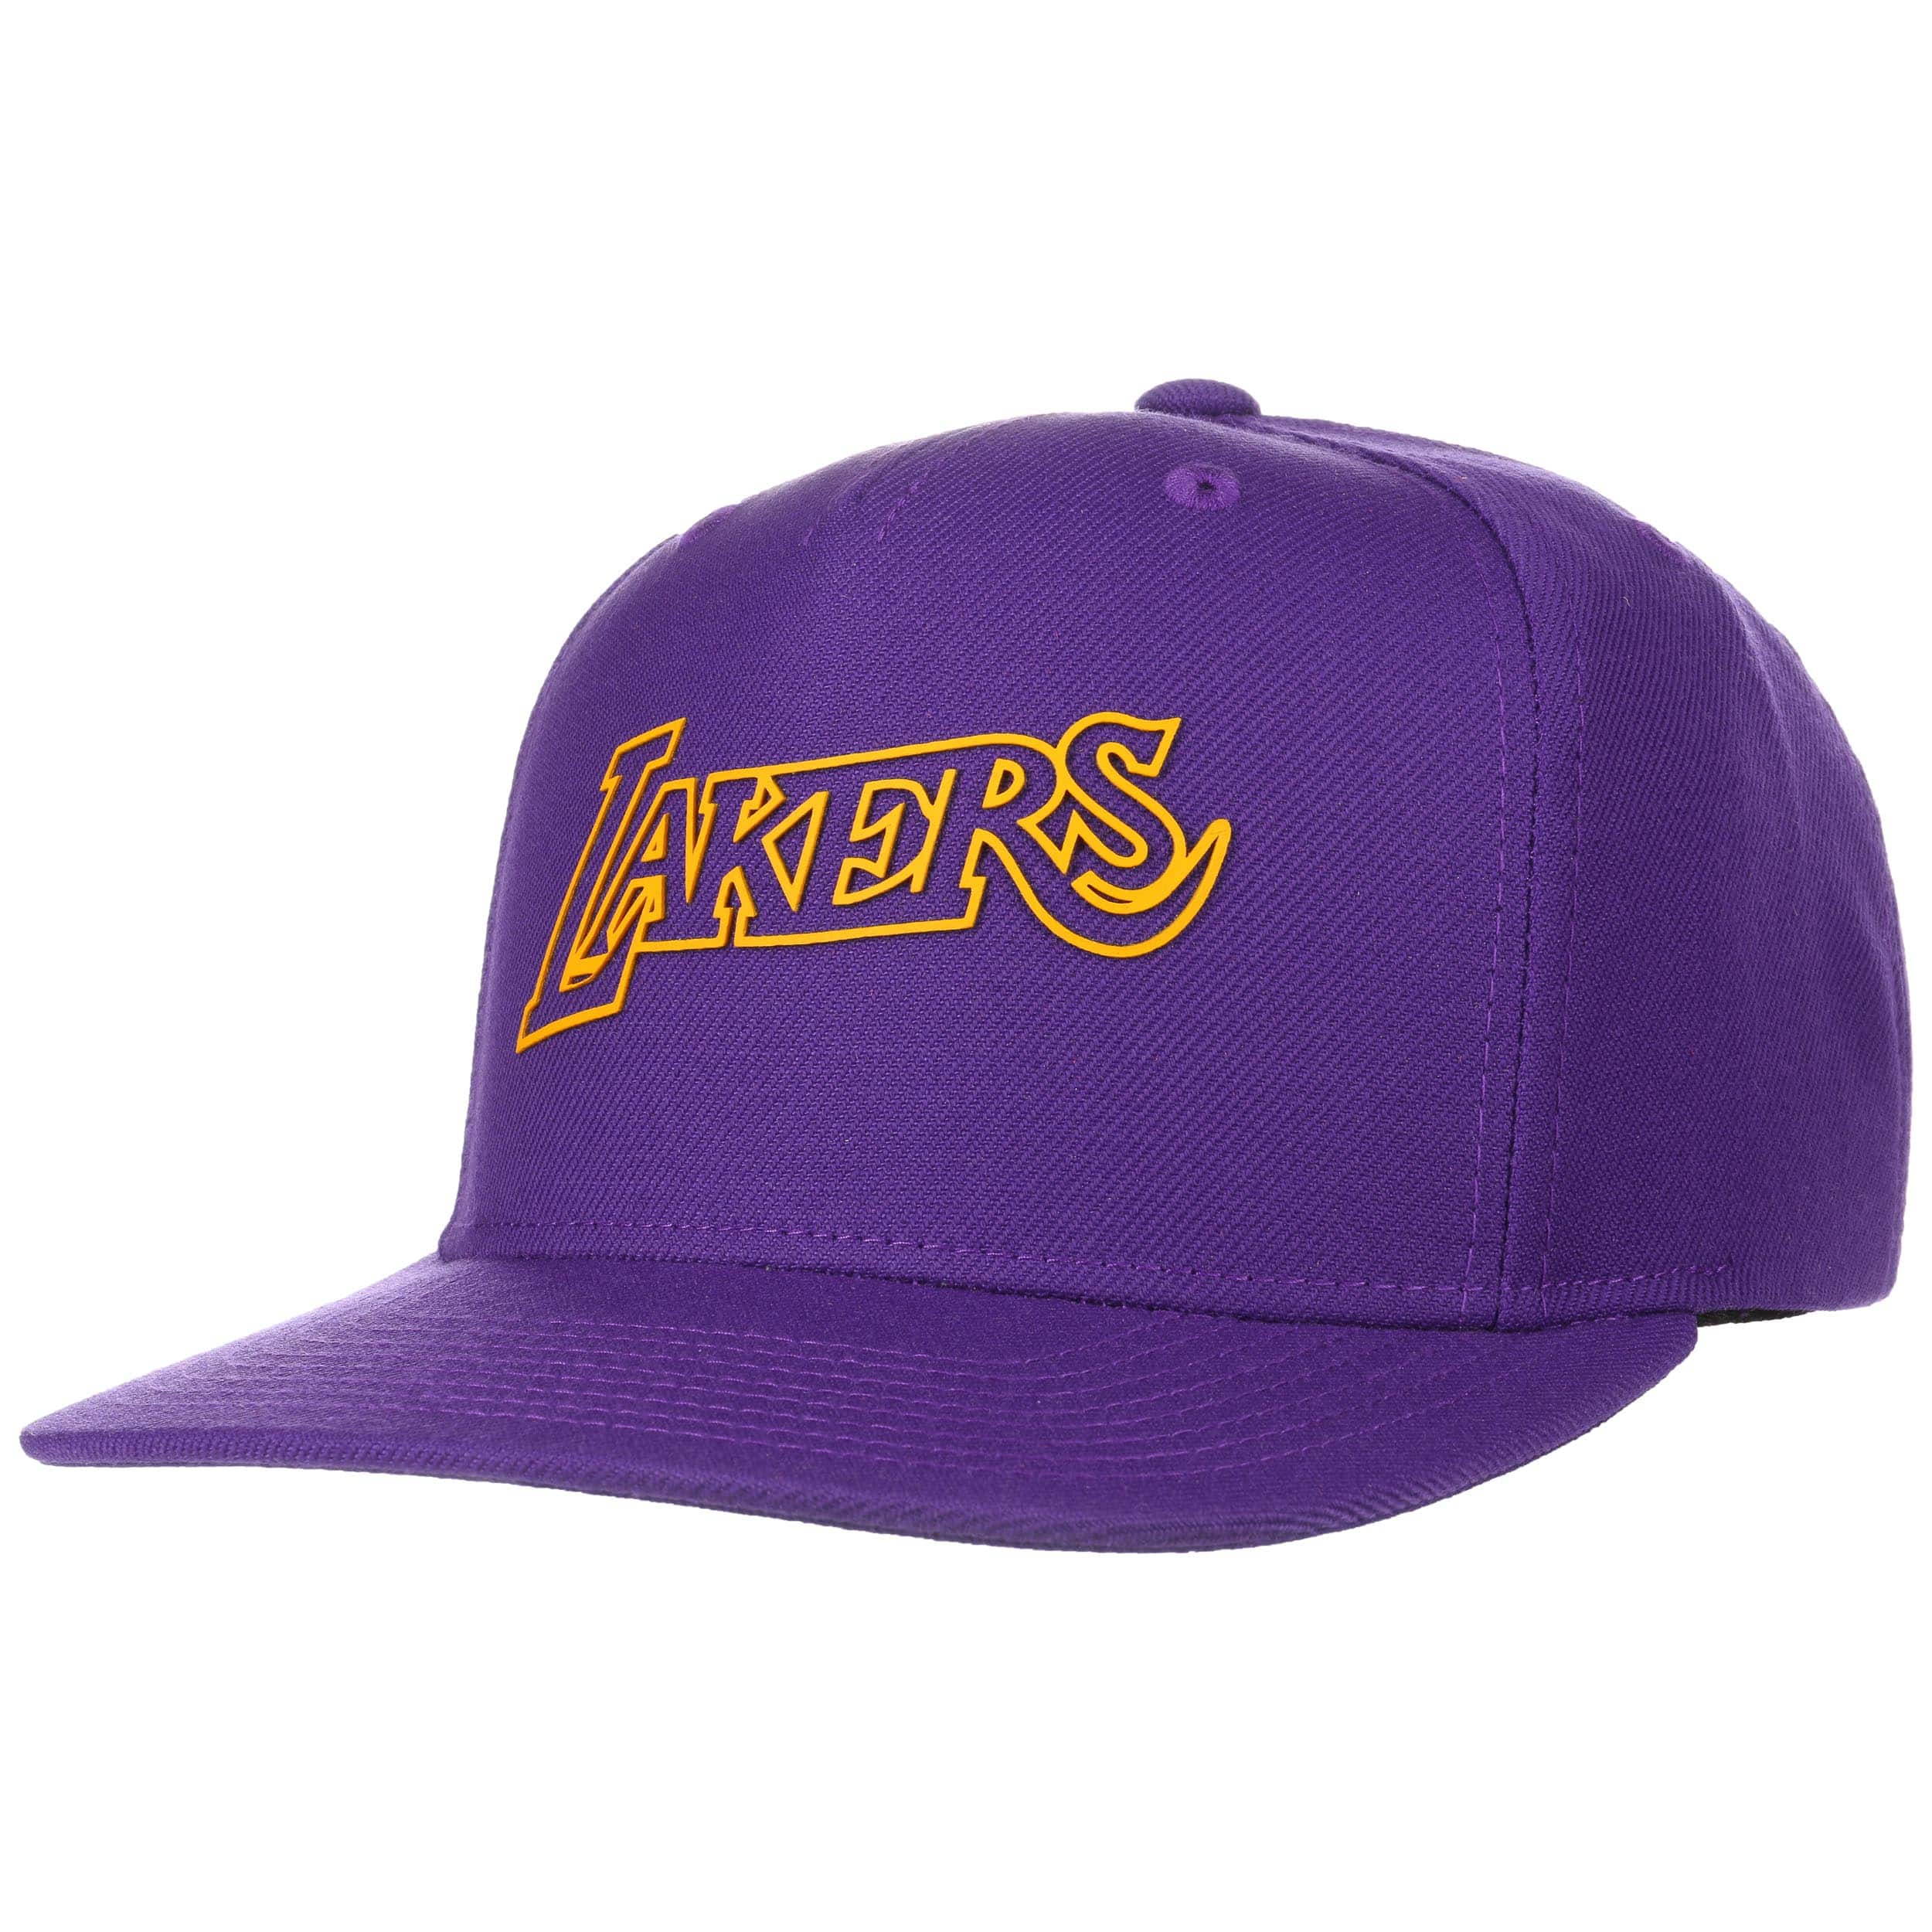 Raised Perimeter Lakers Cap by Mitchell & Ness - 28,95